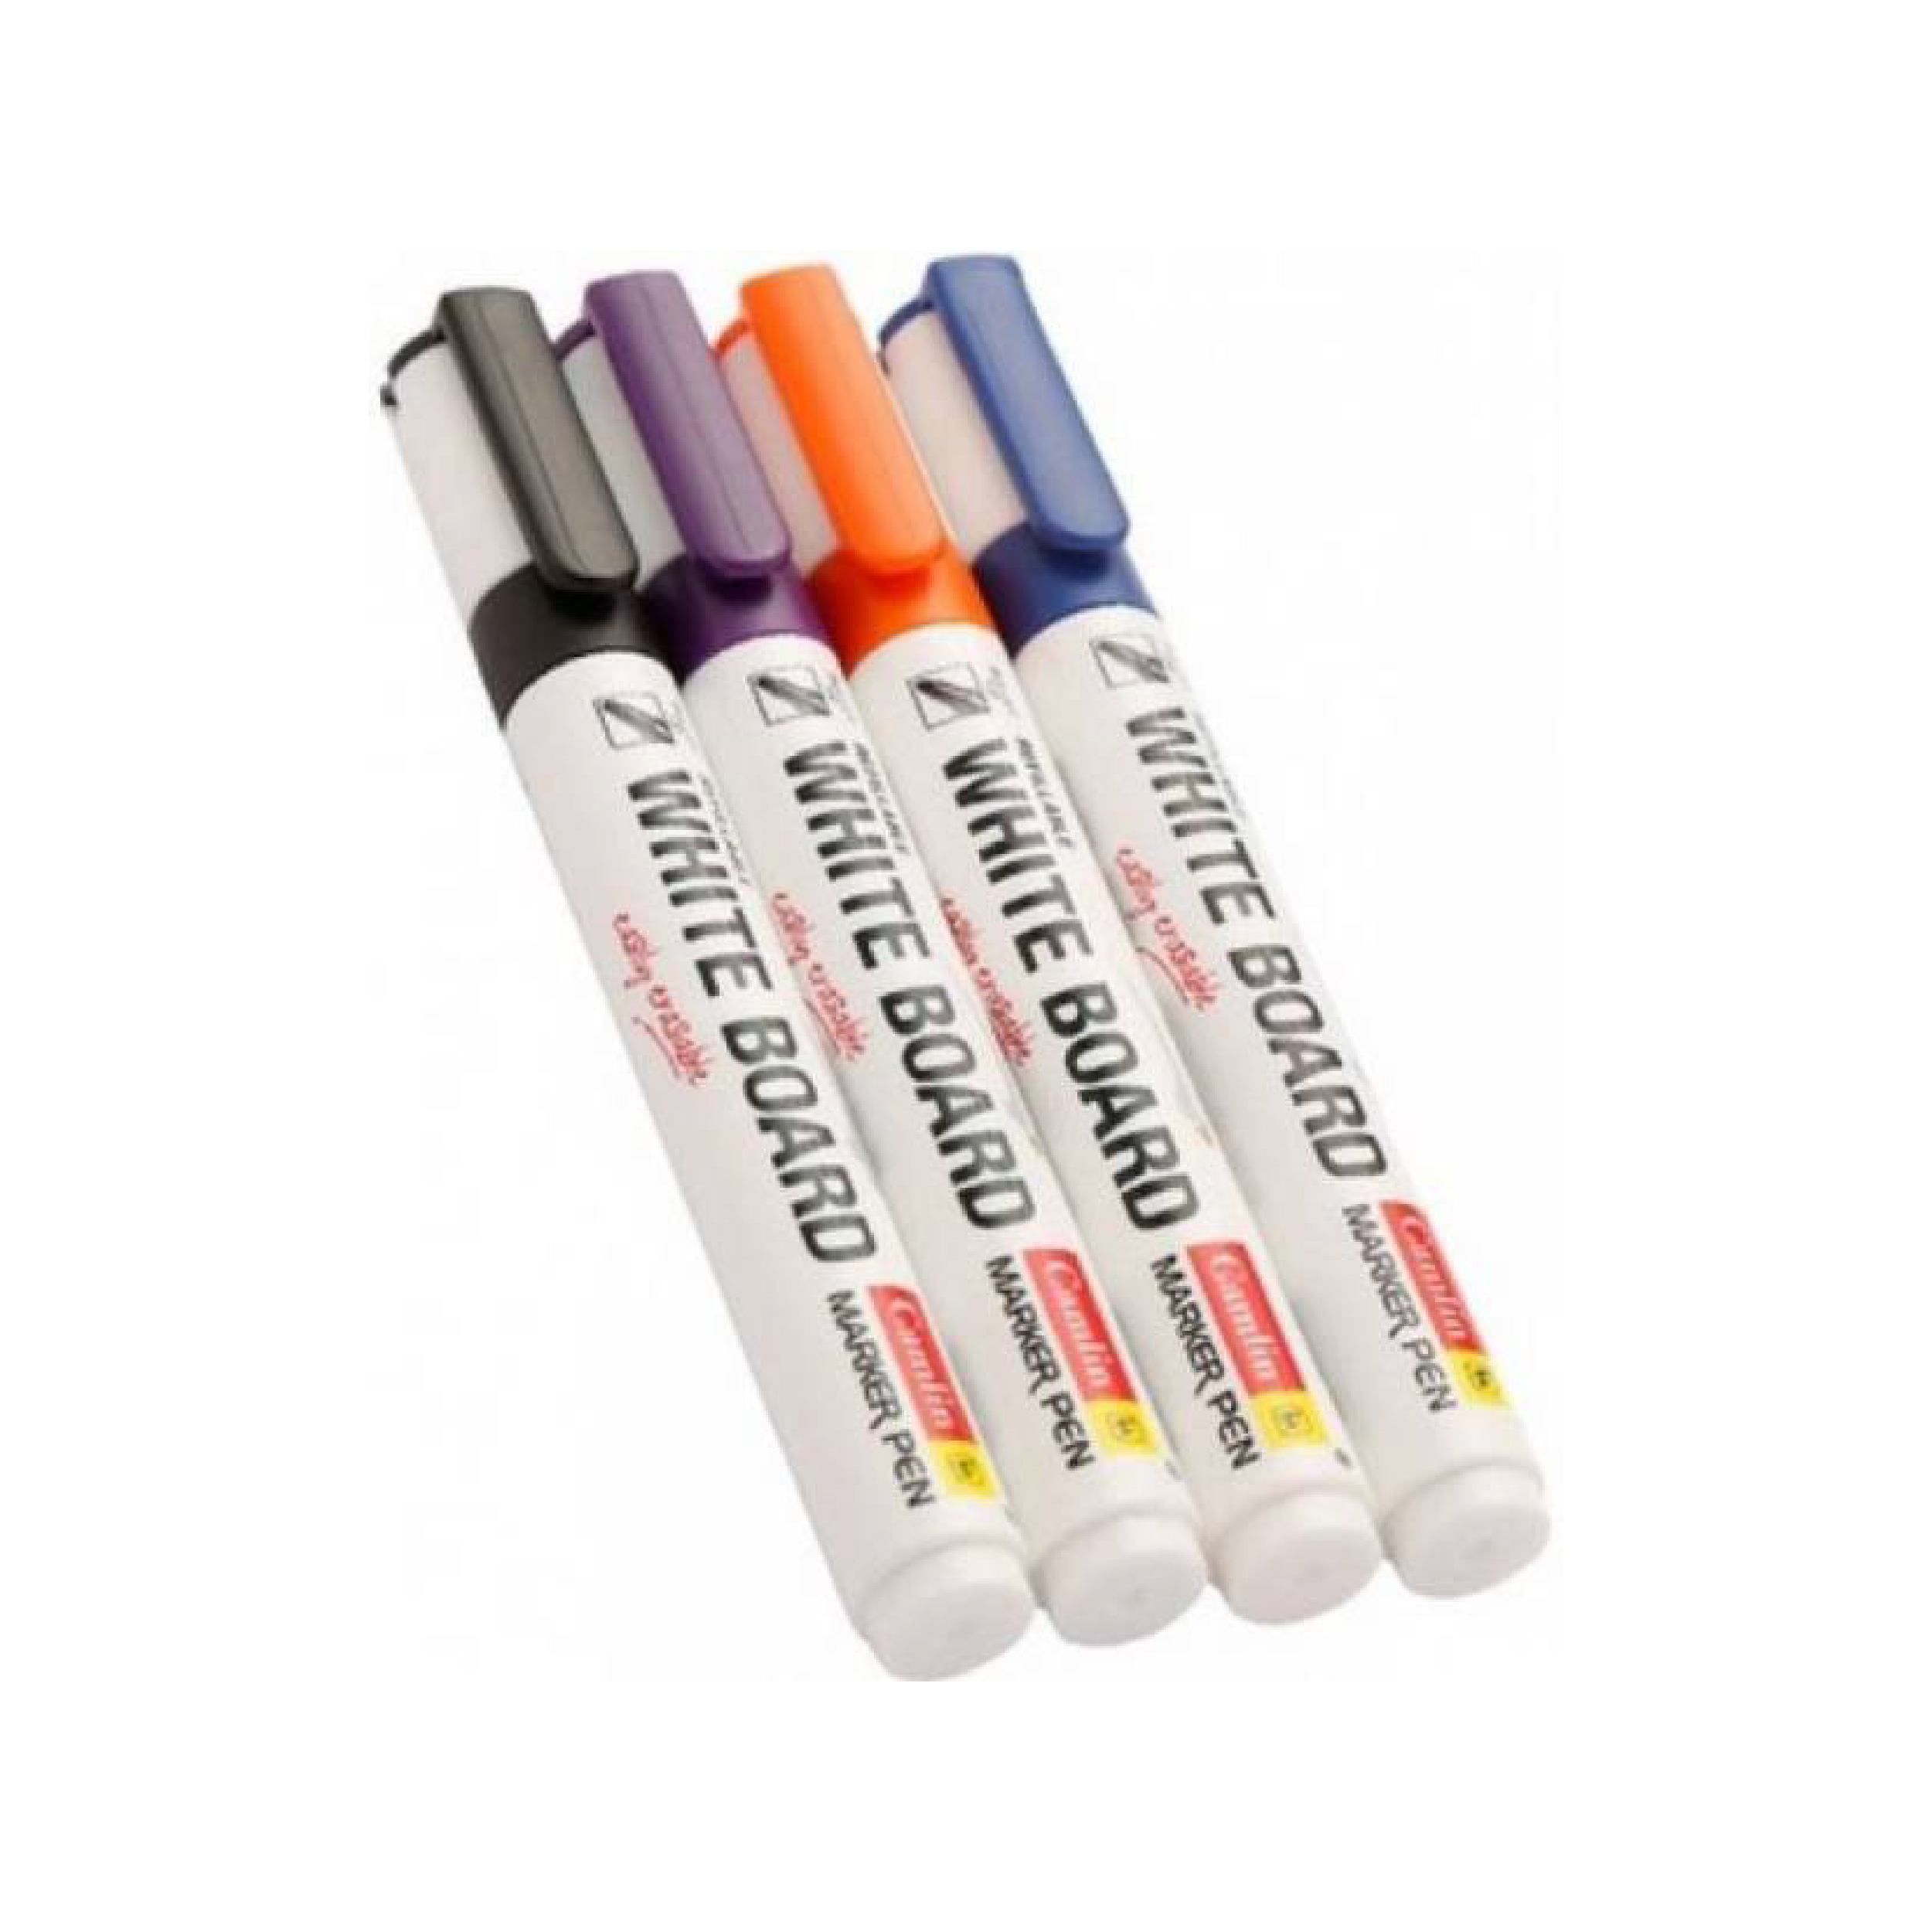 Add a Pop of Color to Your Whiteboard with Camlin Kokuyo White